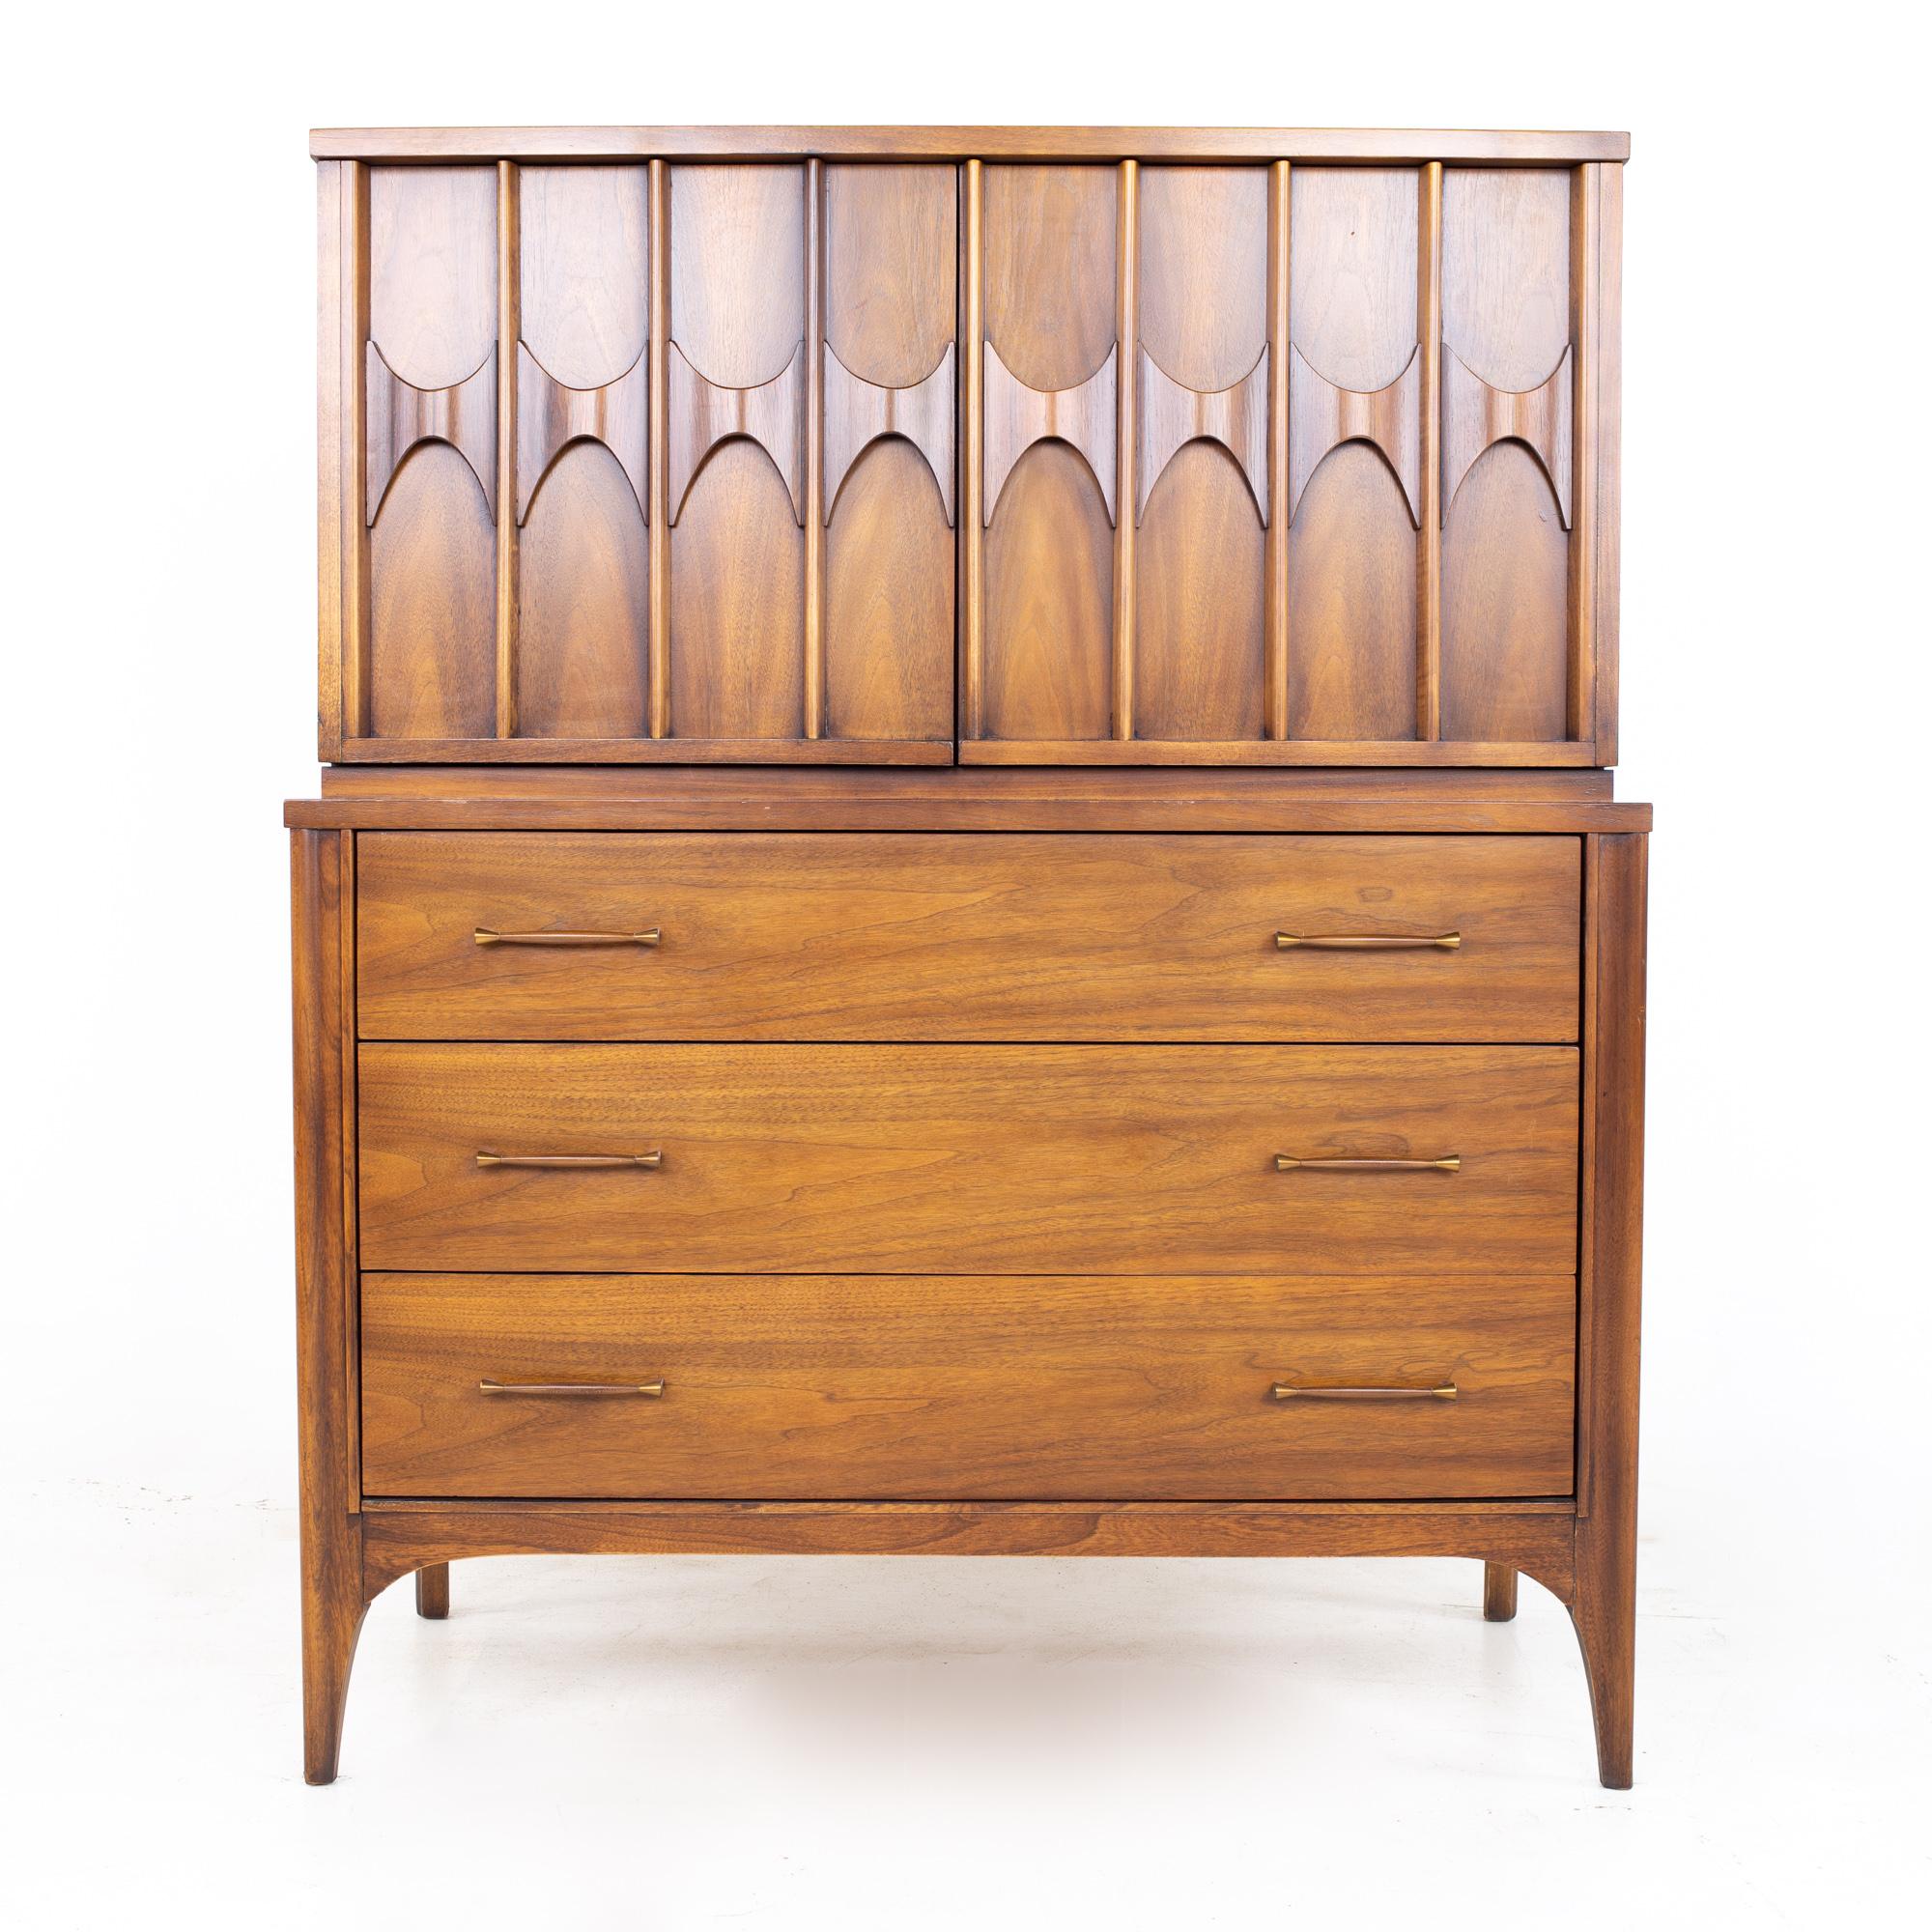 Kent Coffey Perspecta mid century walnut and rosewood armoire gentlemans chest highboy dresser 

Dresser measures: 40.75 wide x 19.25 deep x 51.75 inches high

?All pieces of furniture can be had in what we call restored vintage condition. That